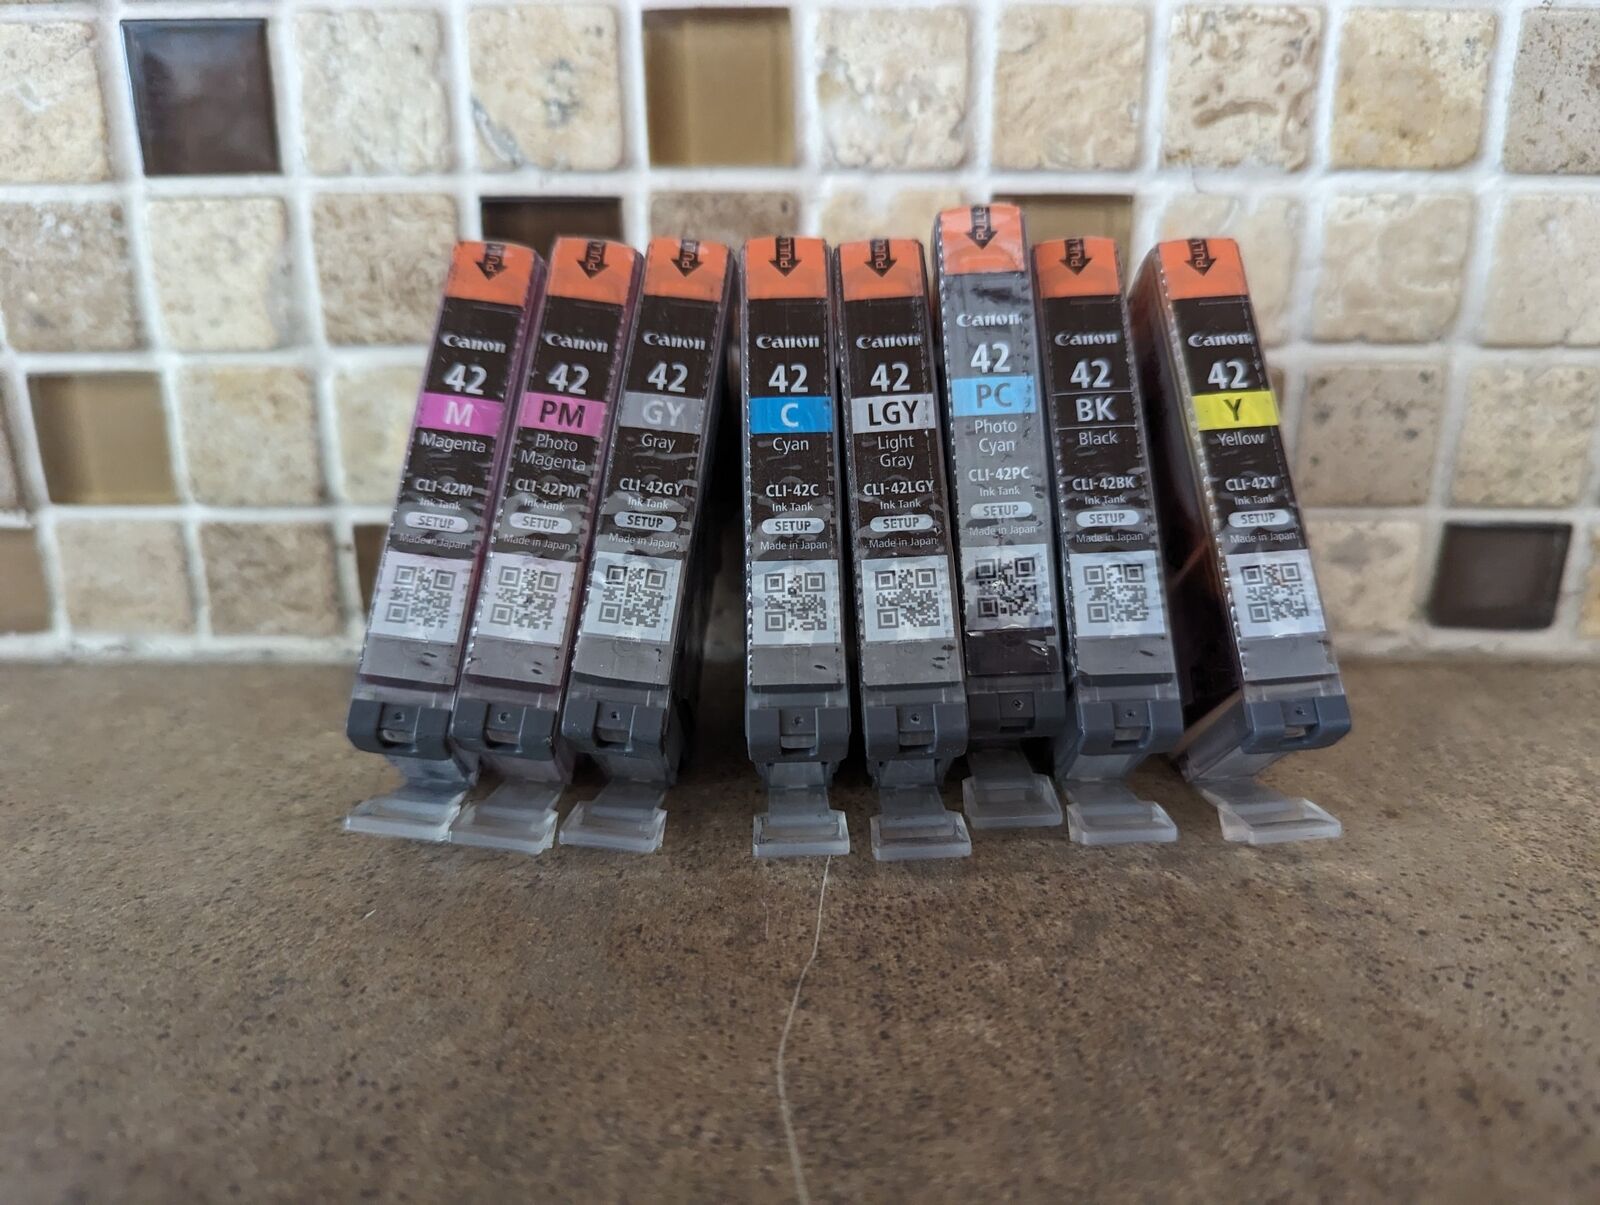 8 PACK OF GENUINE CANON CLI-42 6384B007 INK CARTRIDGES B2-2(14)